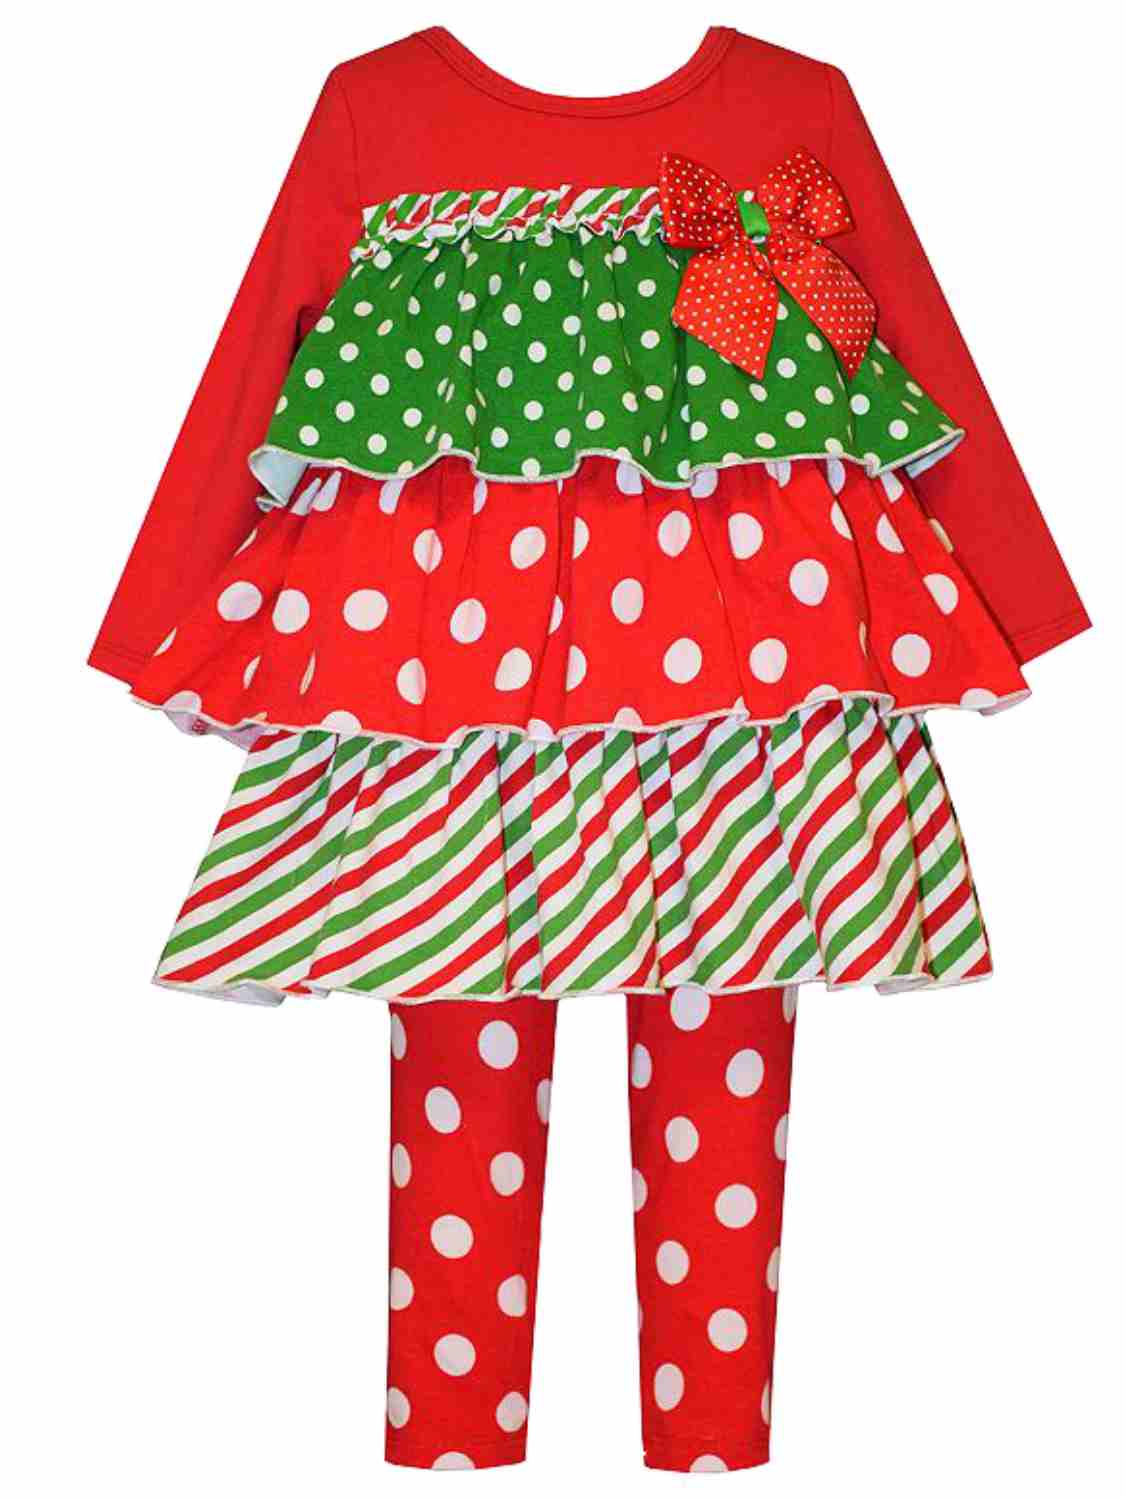 Bonnie Baby Infant Girls 2 PC Red Ruffled Holiday Outfit Shirt Dot Leggings 12m